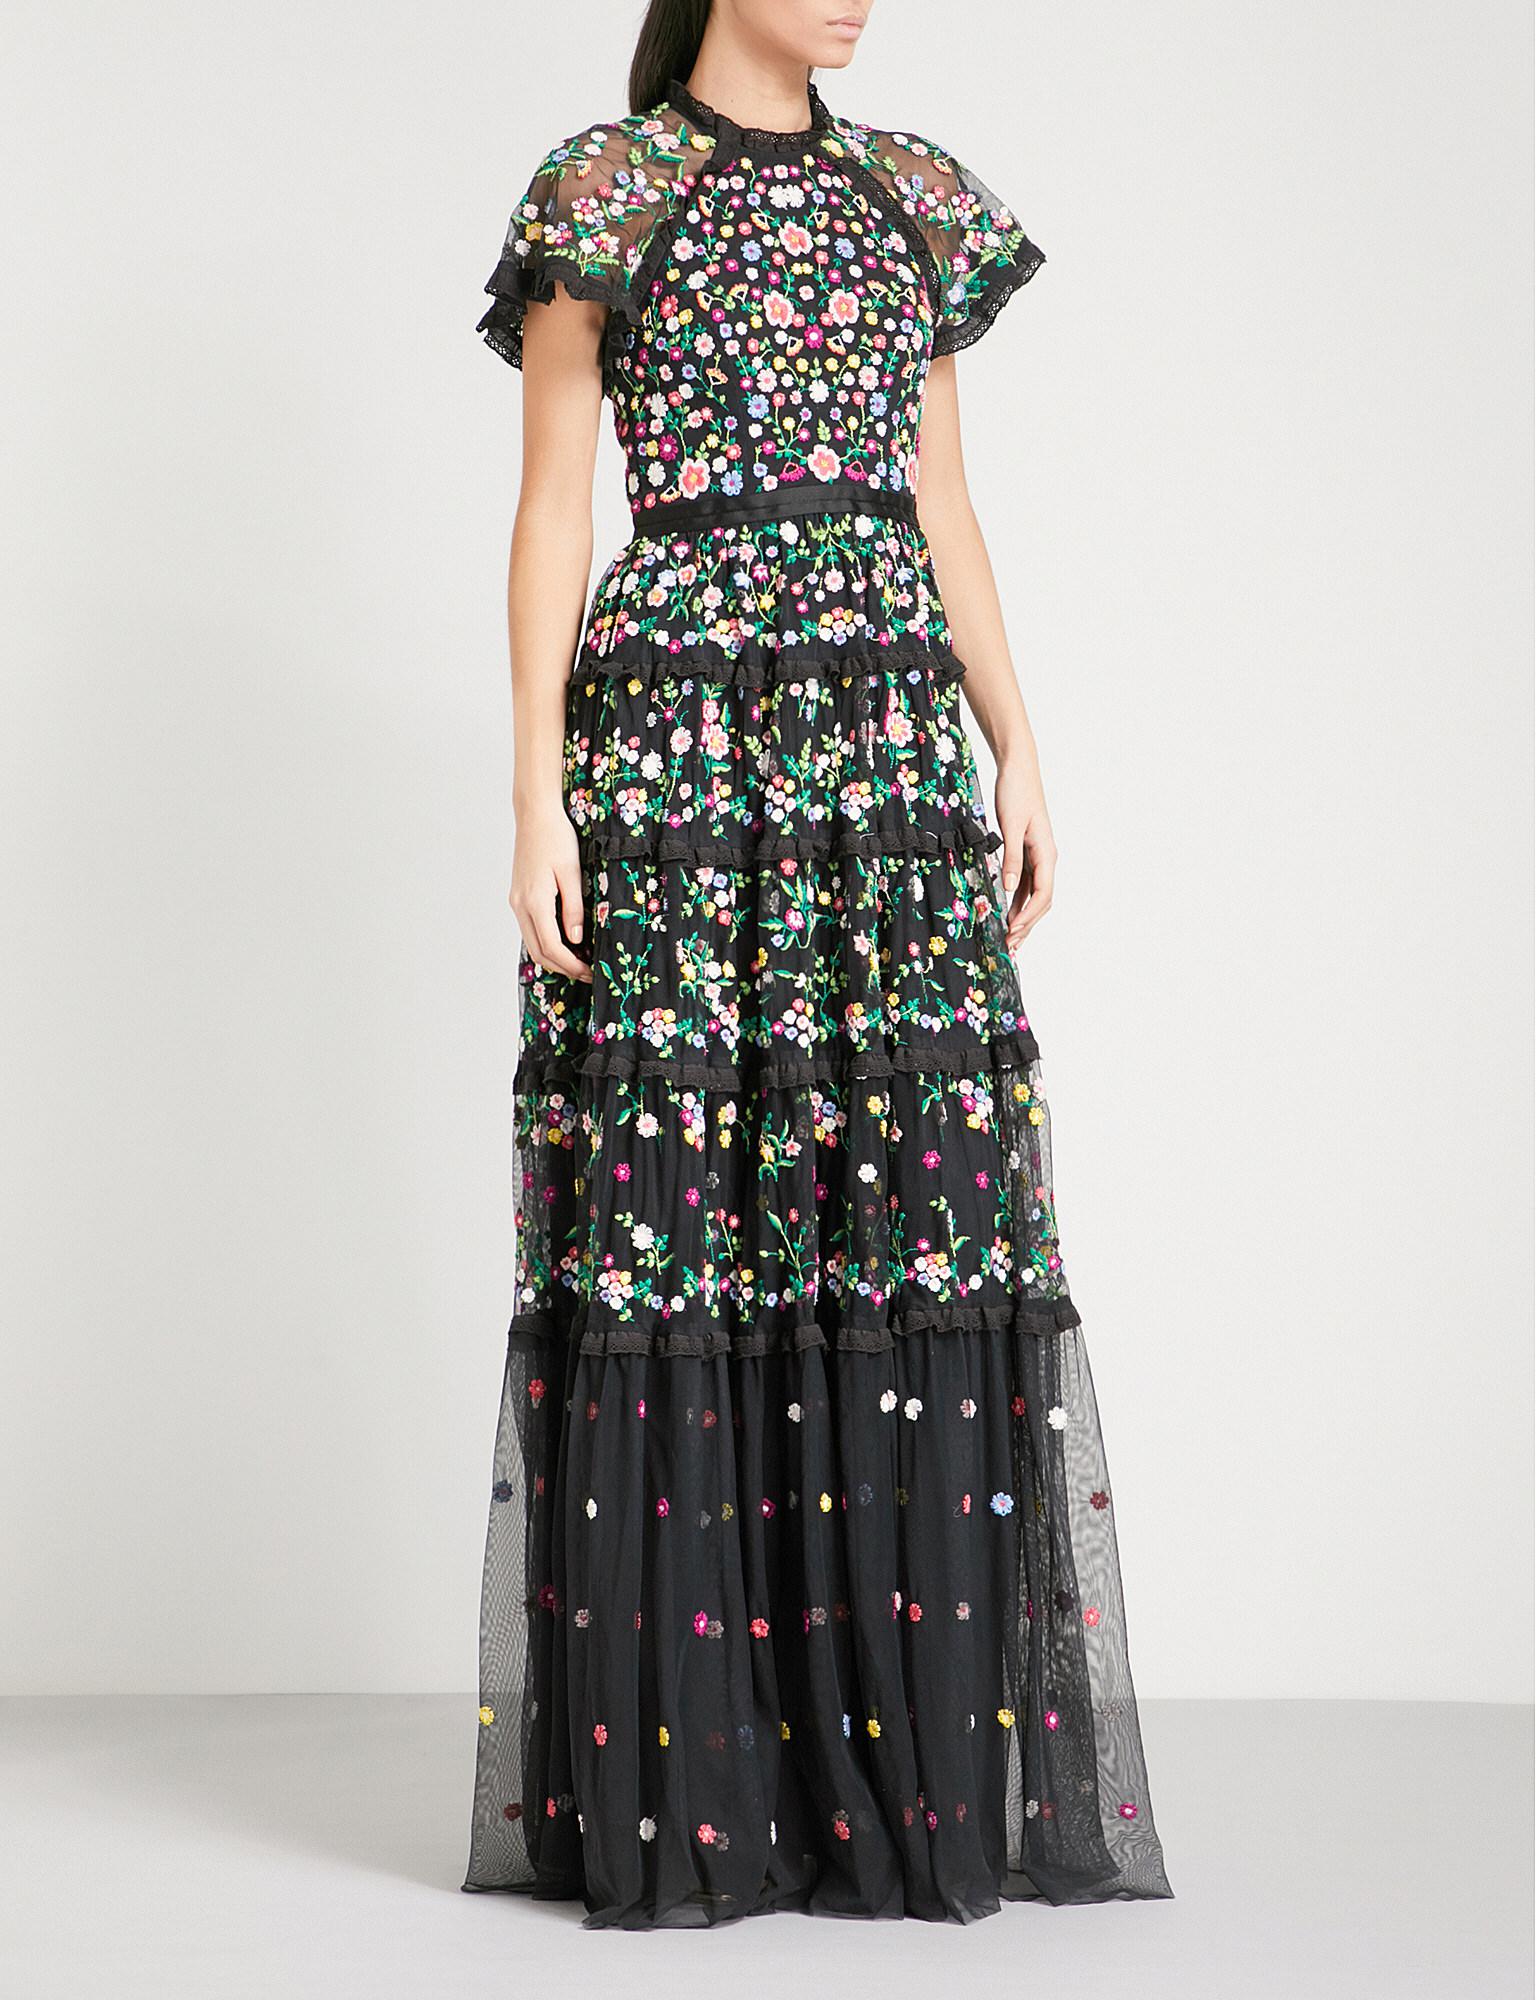 Lyst - Needle & Thread Lazy Daisy Embroidered Tulle Gown in Black